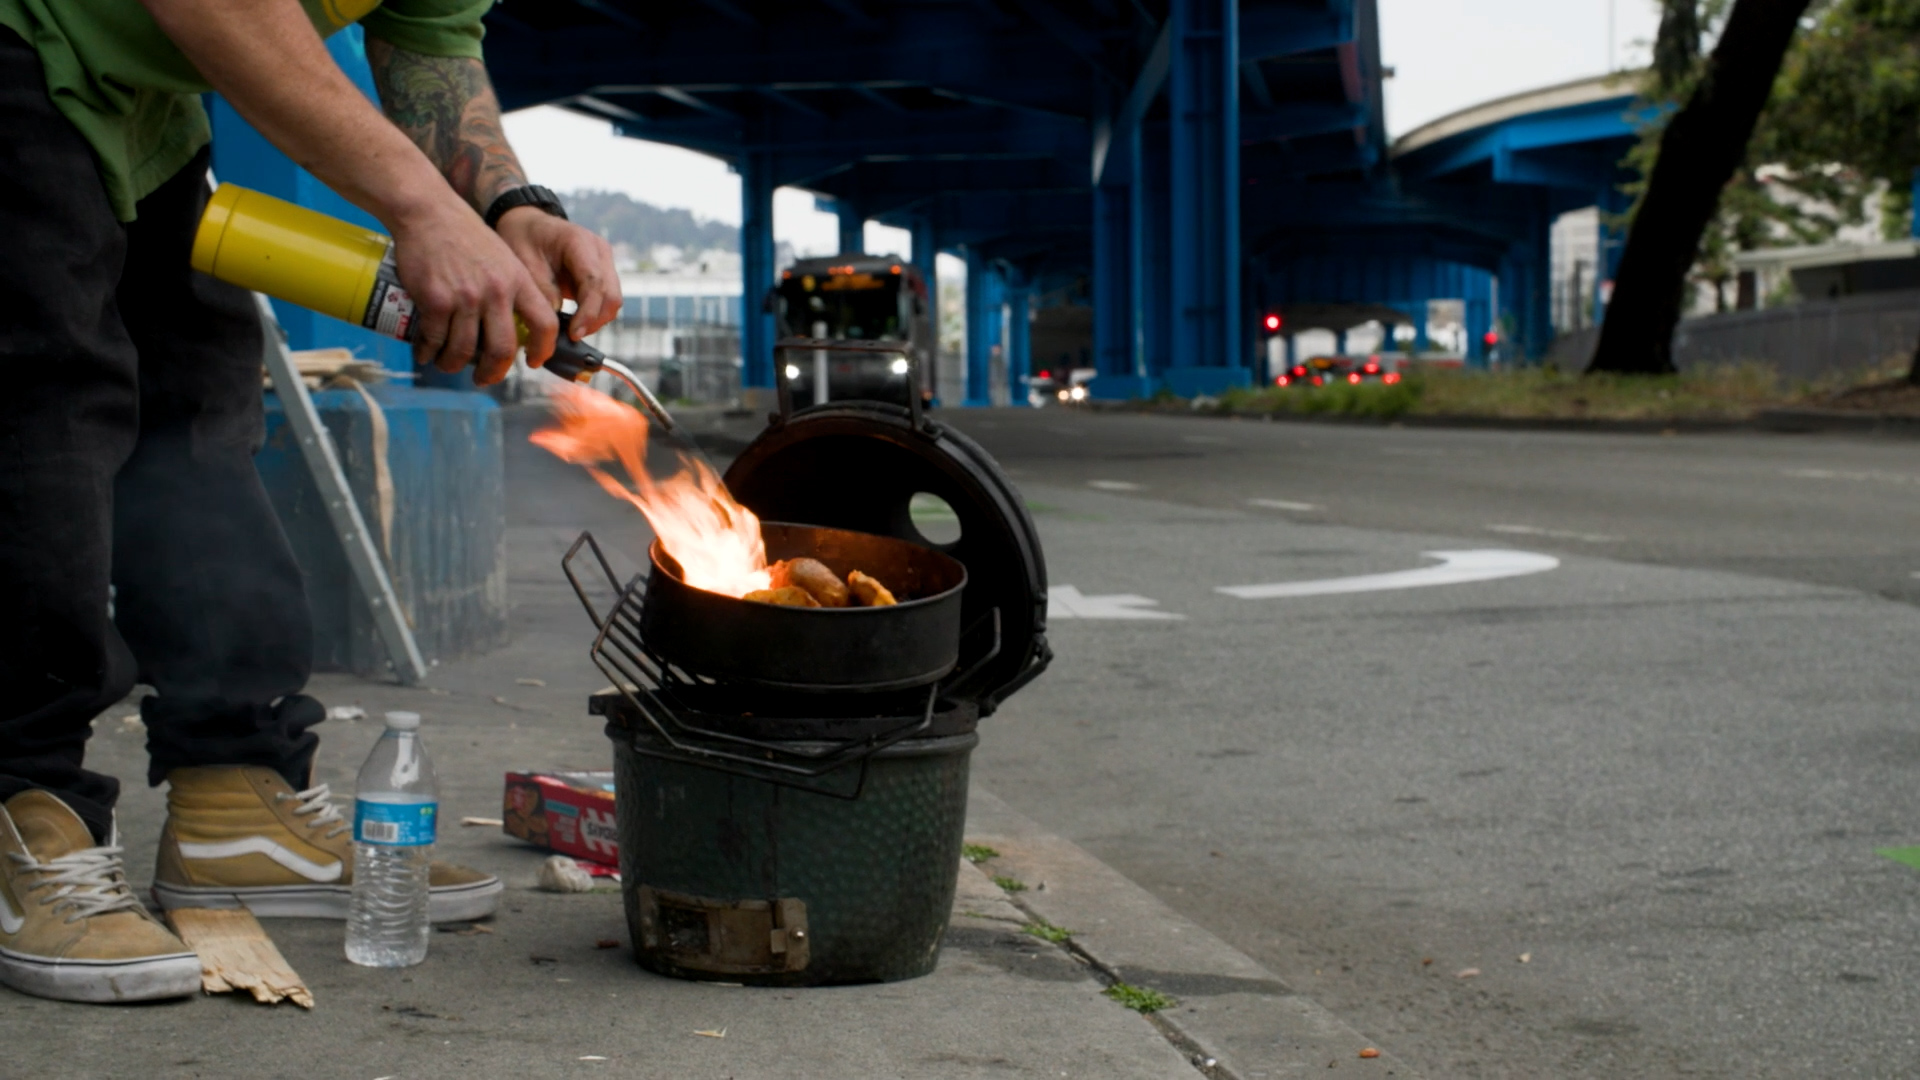 A man cooks food outdoors on a small grill using a gas torch along a sidewalk next to a street under a freeway overpass.